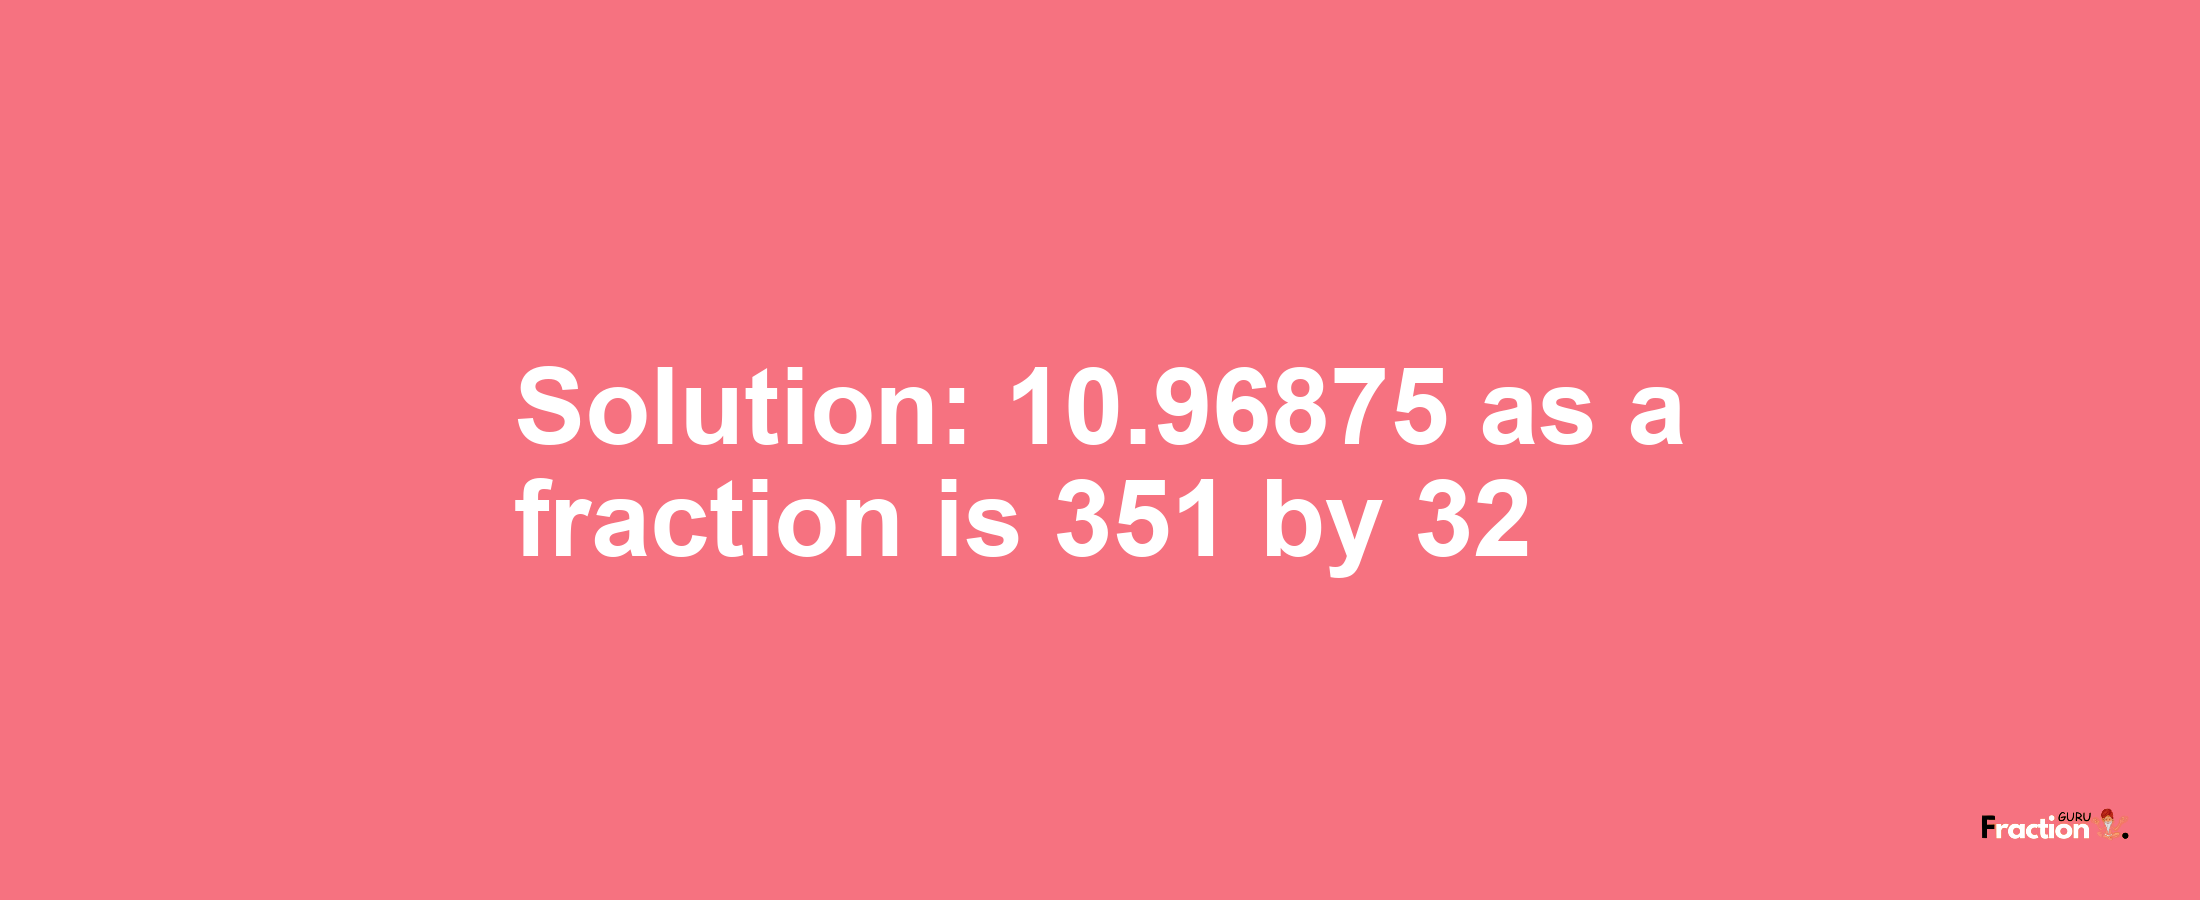 Solution:10.96875 as a fraction is 351/32